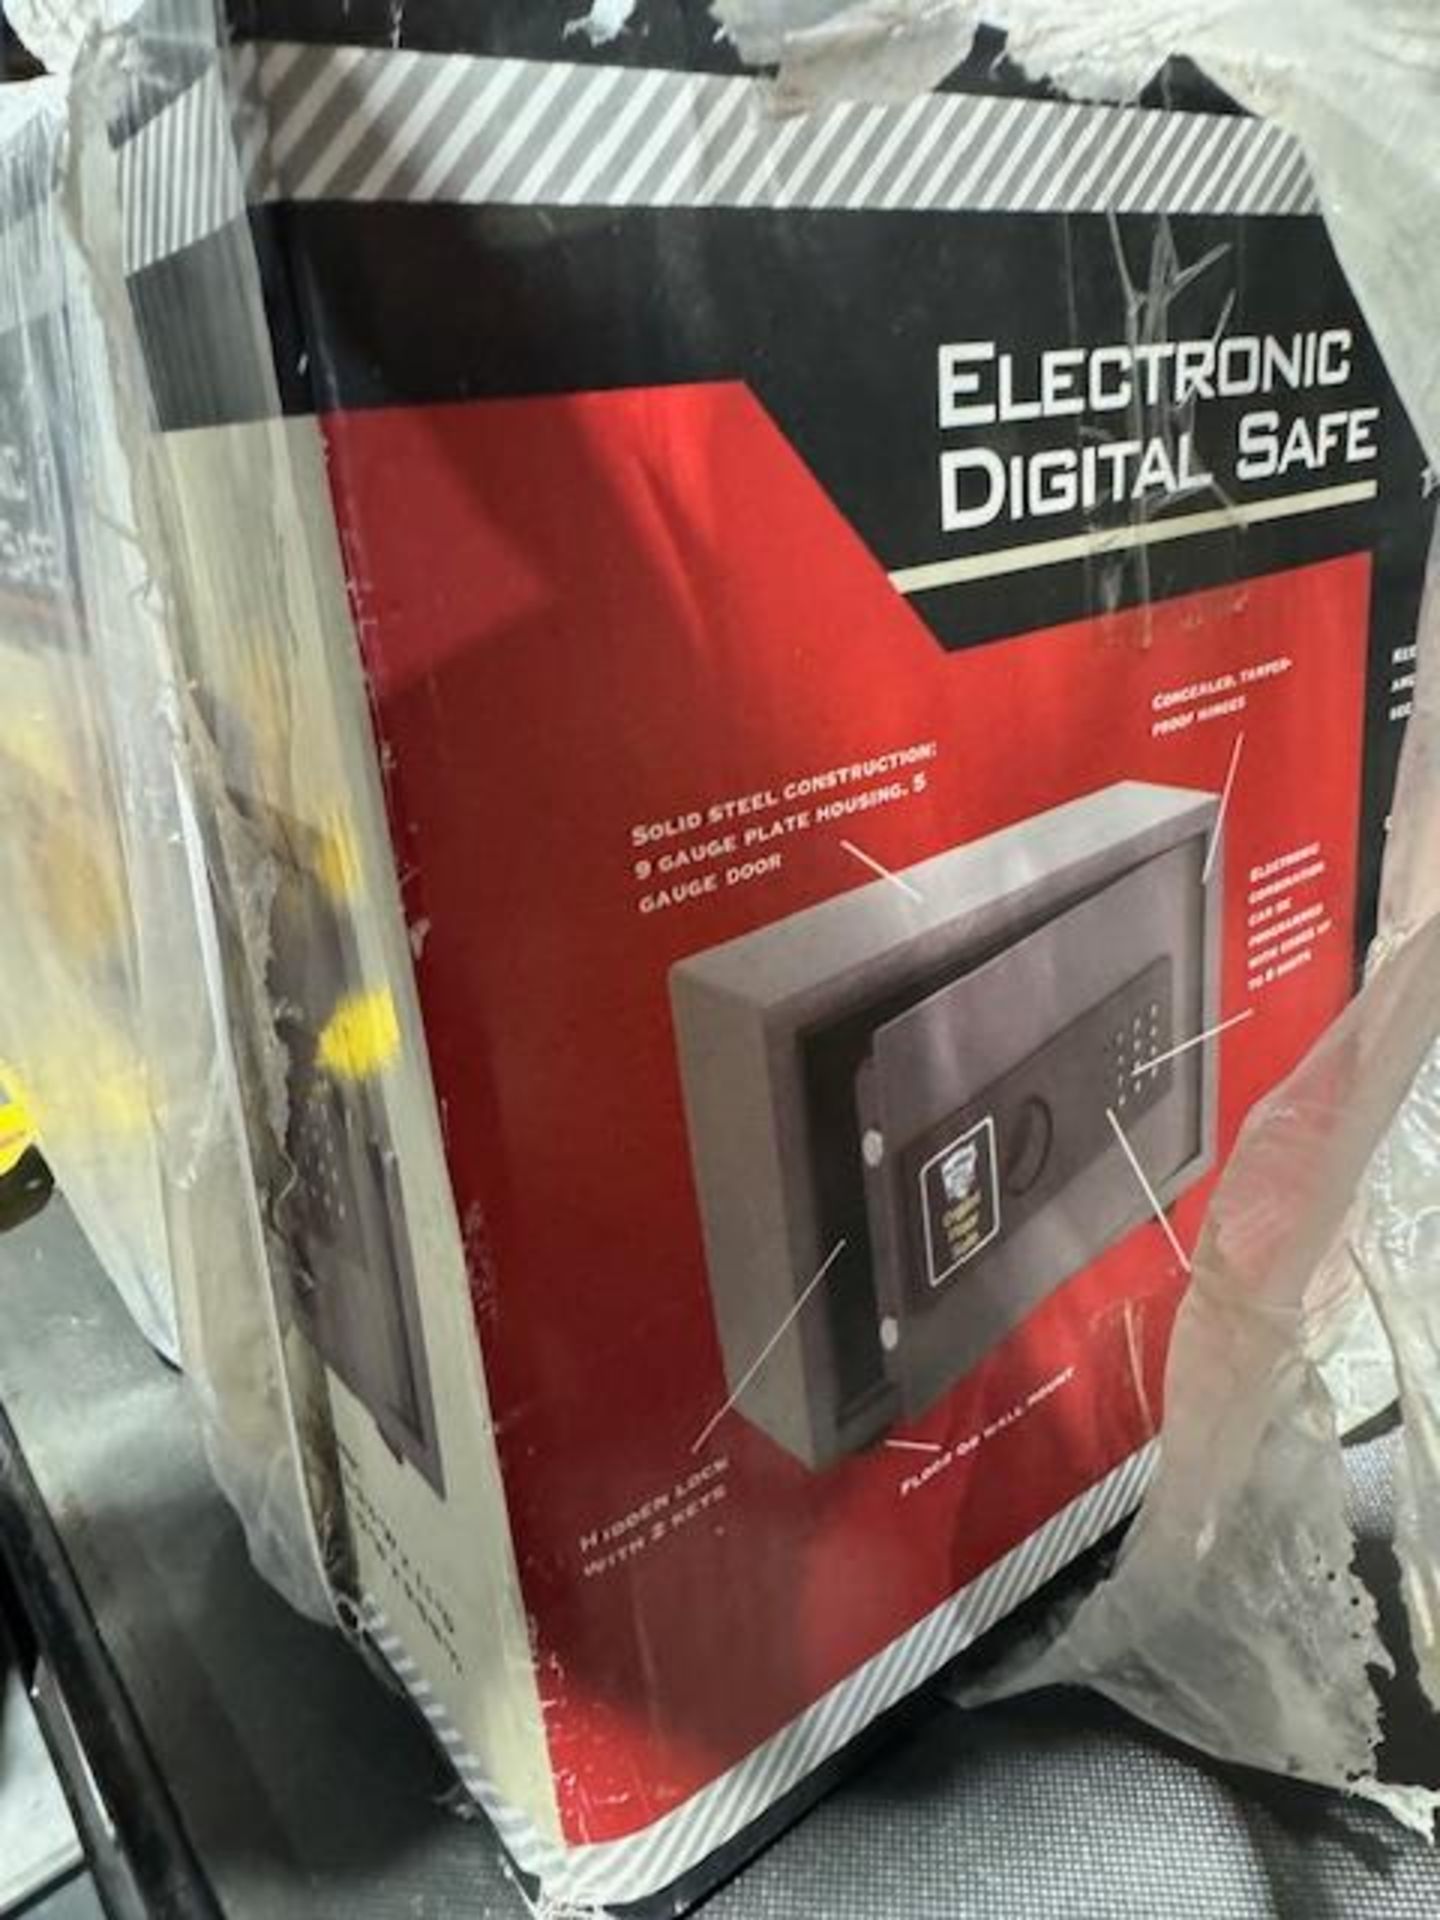 NEW ELECTRONIC DIGITAL SAFE (Located in Southampton, PA) - Image 2 of 3